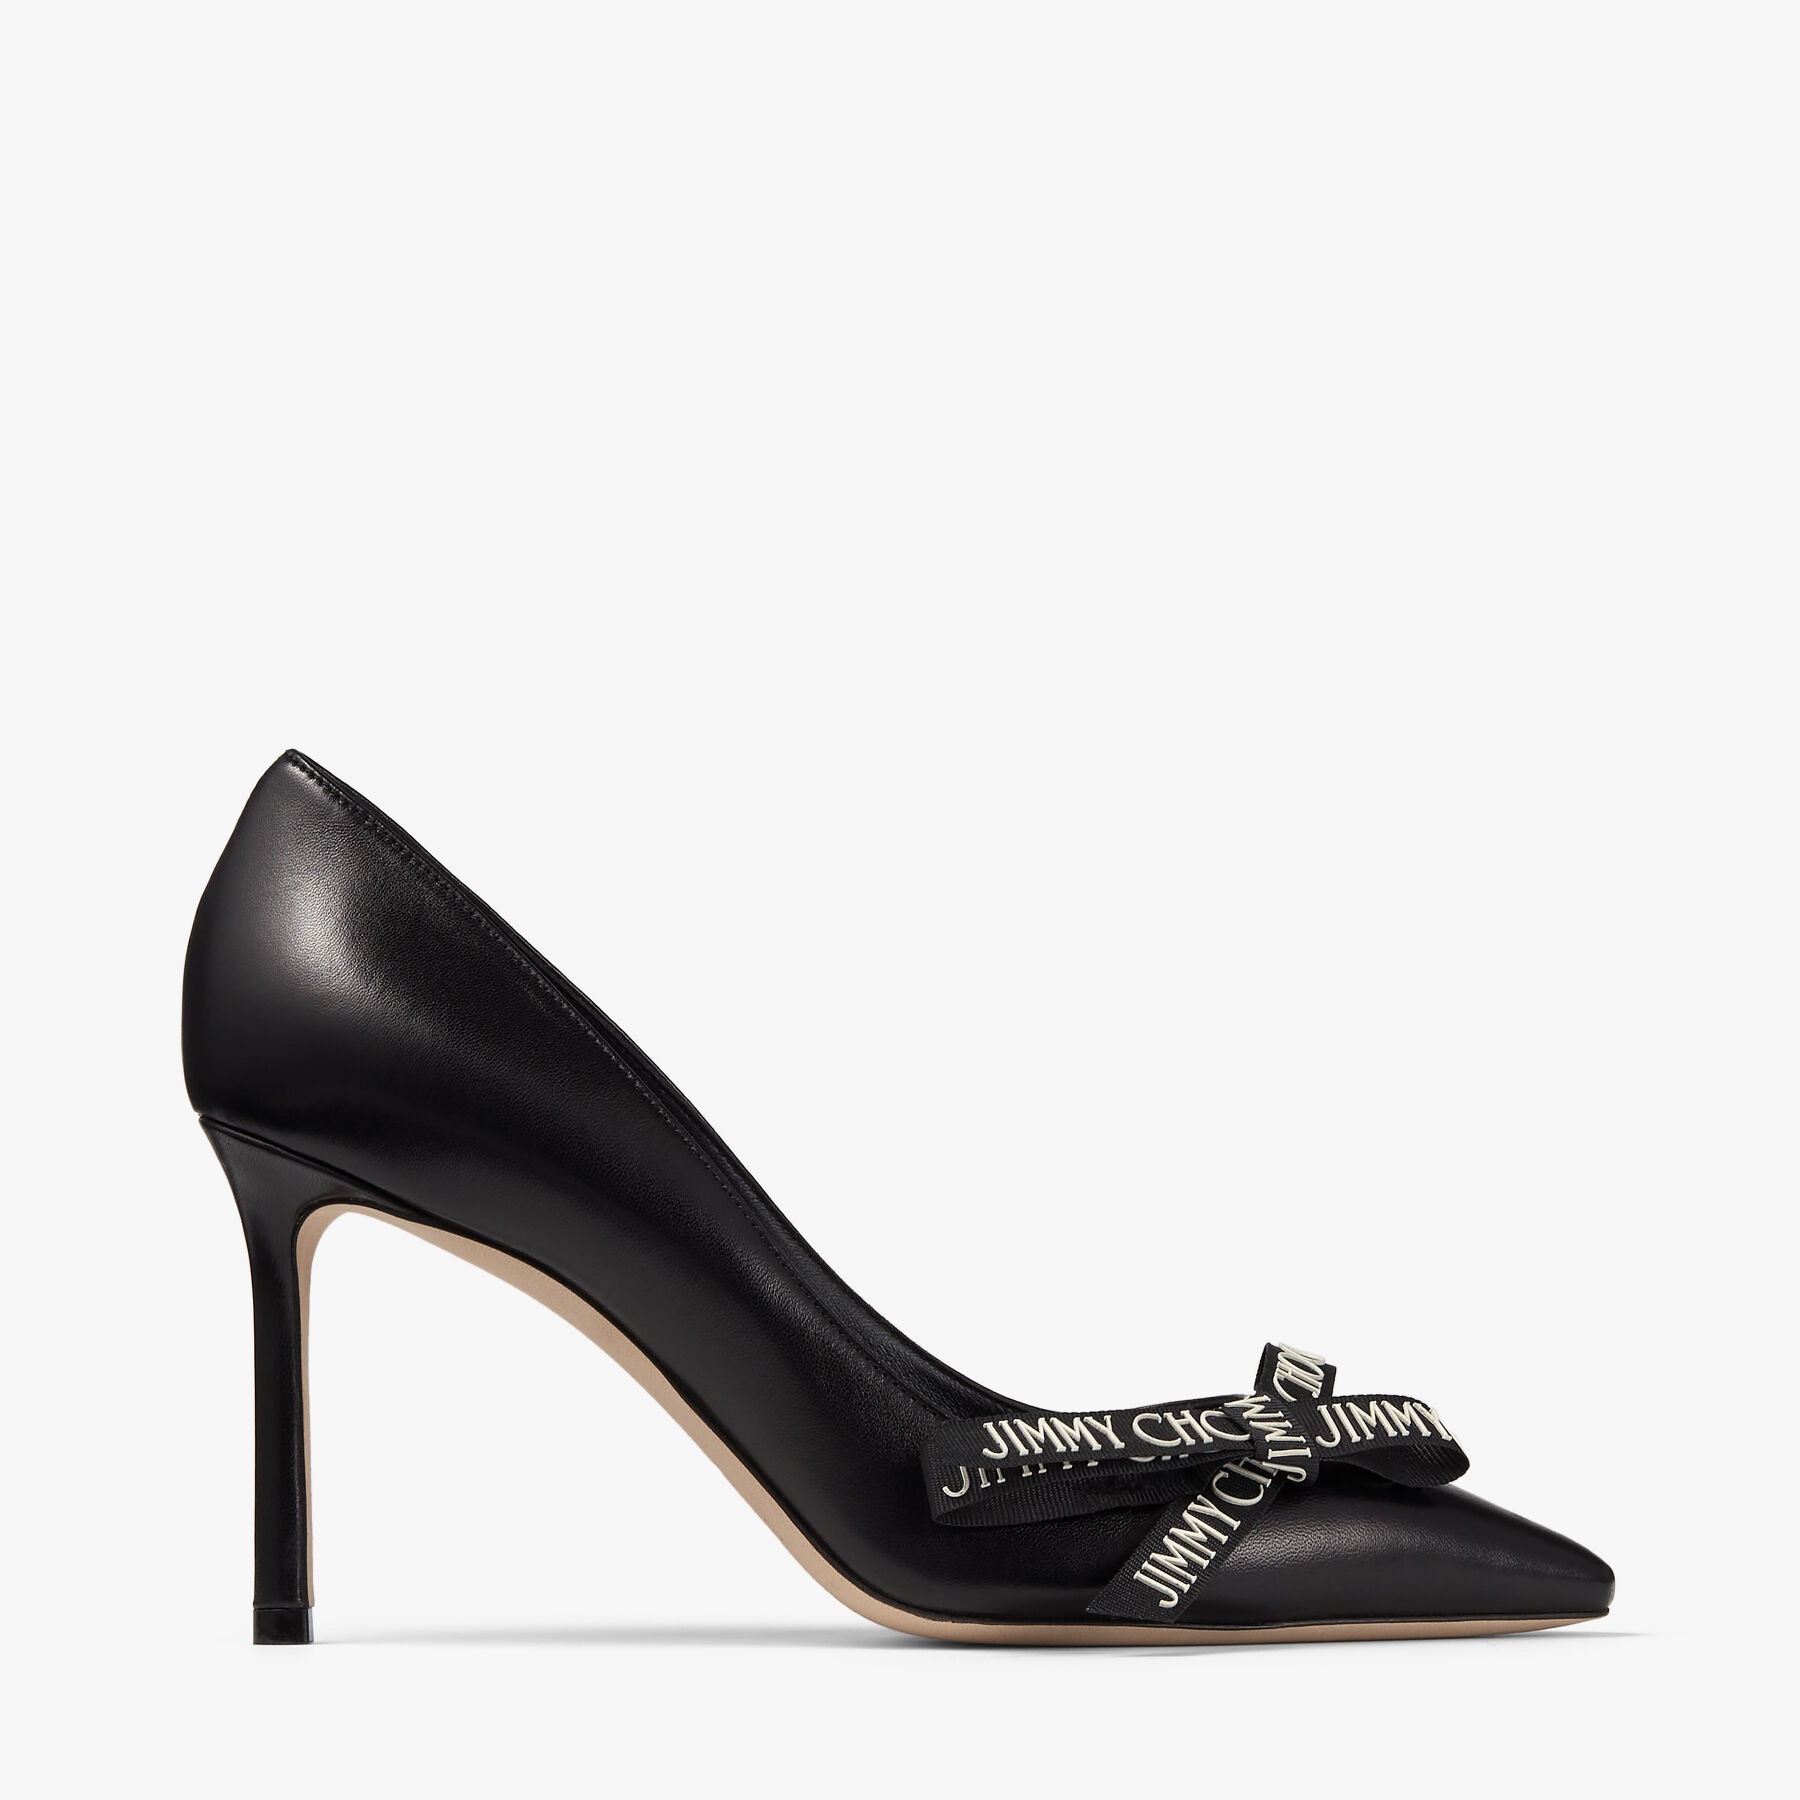 Romy 85
Black Nappa Leather Pumps with Jimmy Choo Bow - 1